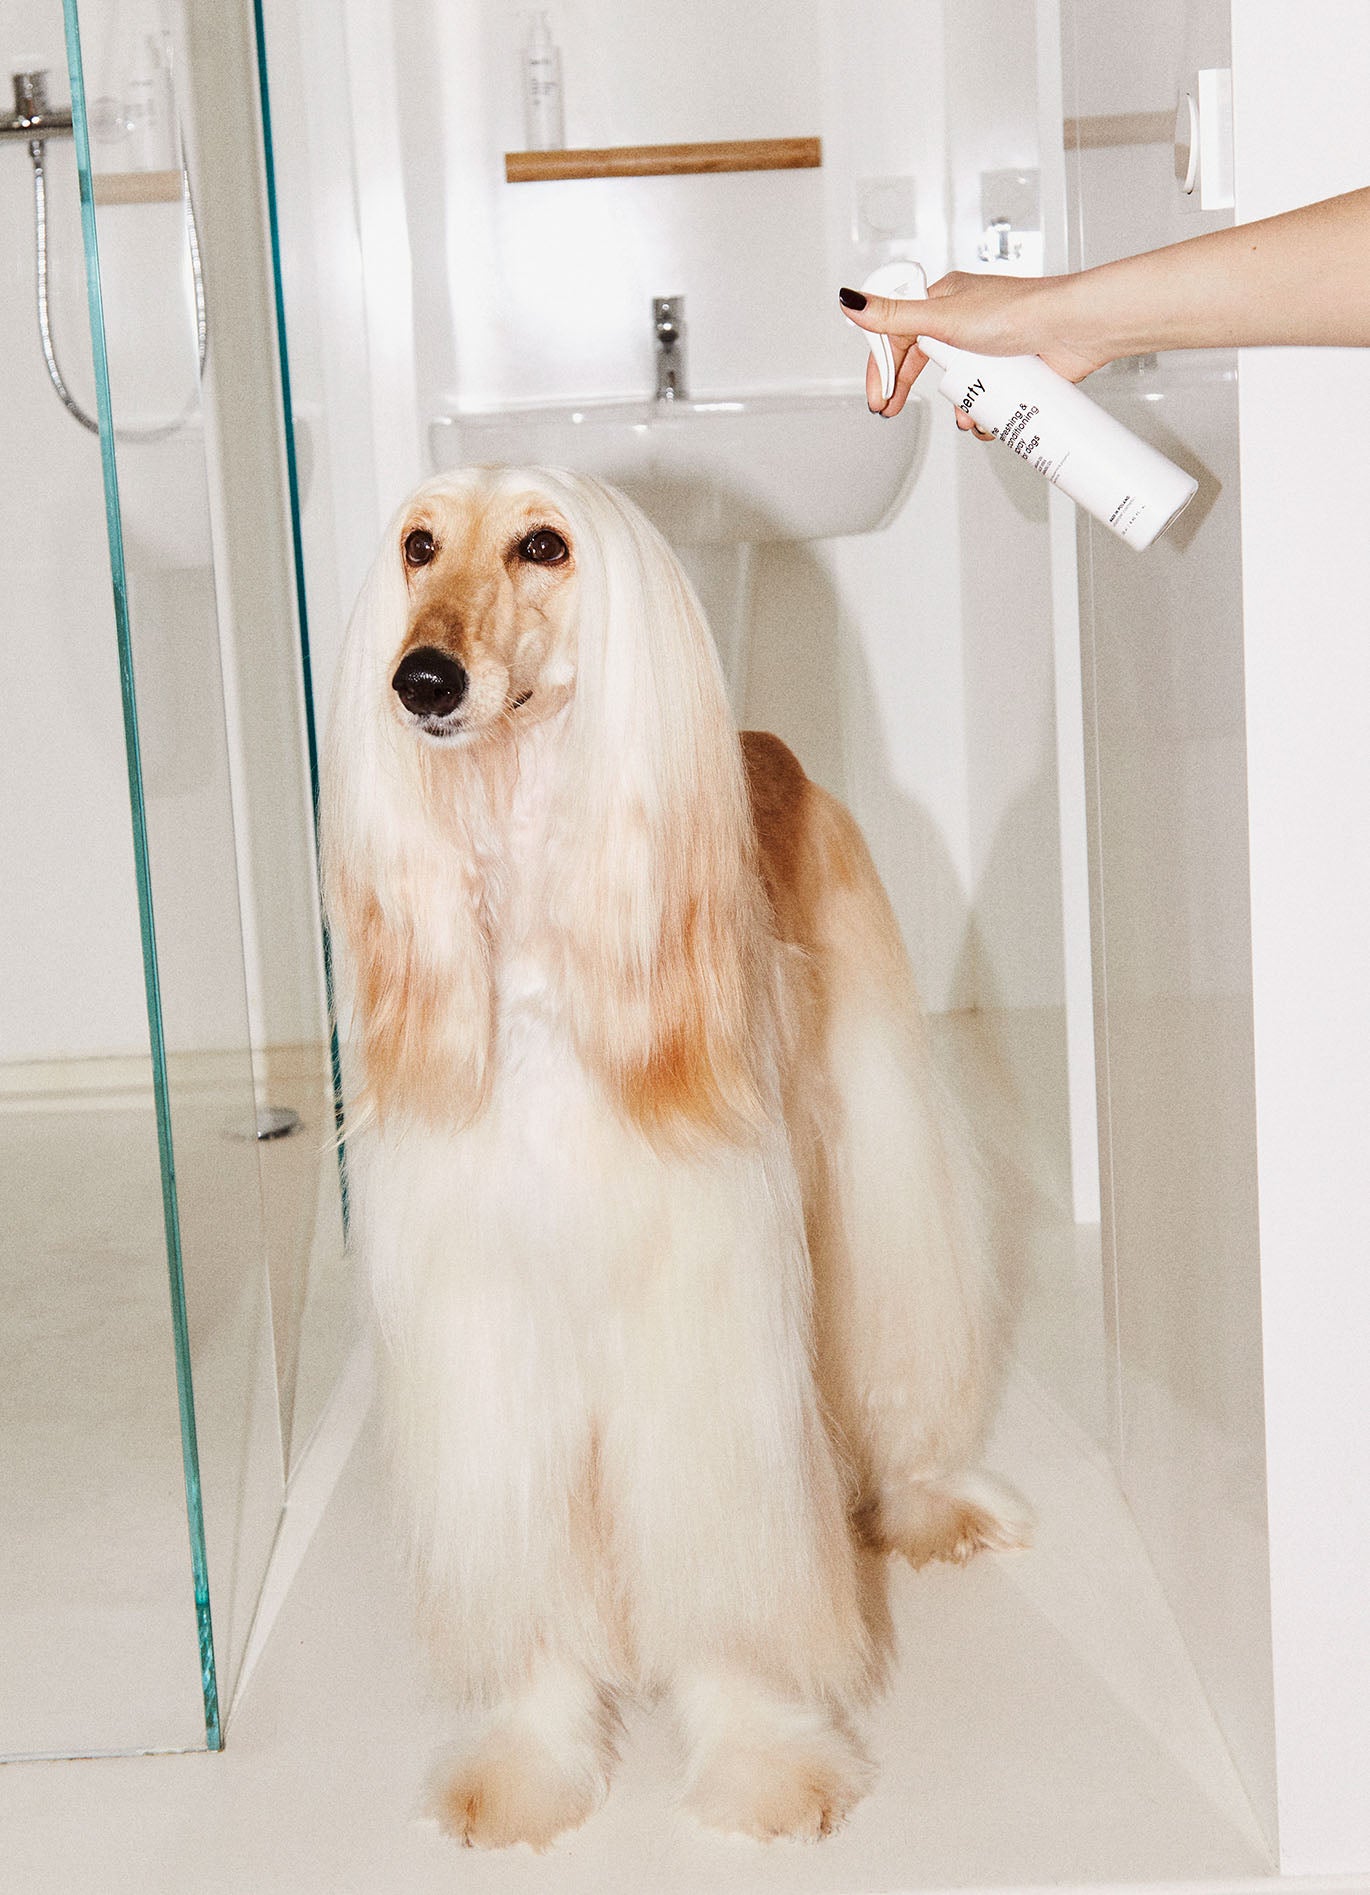 Refreshing & conditioning spray for dogs